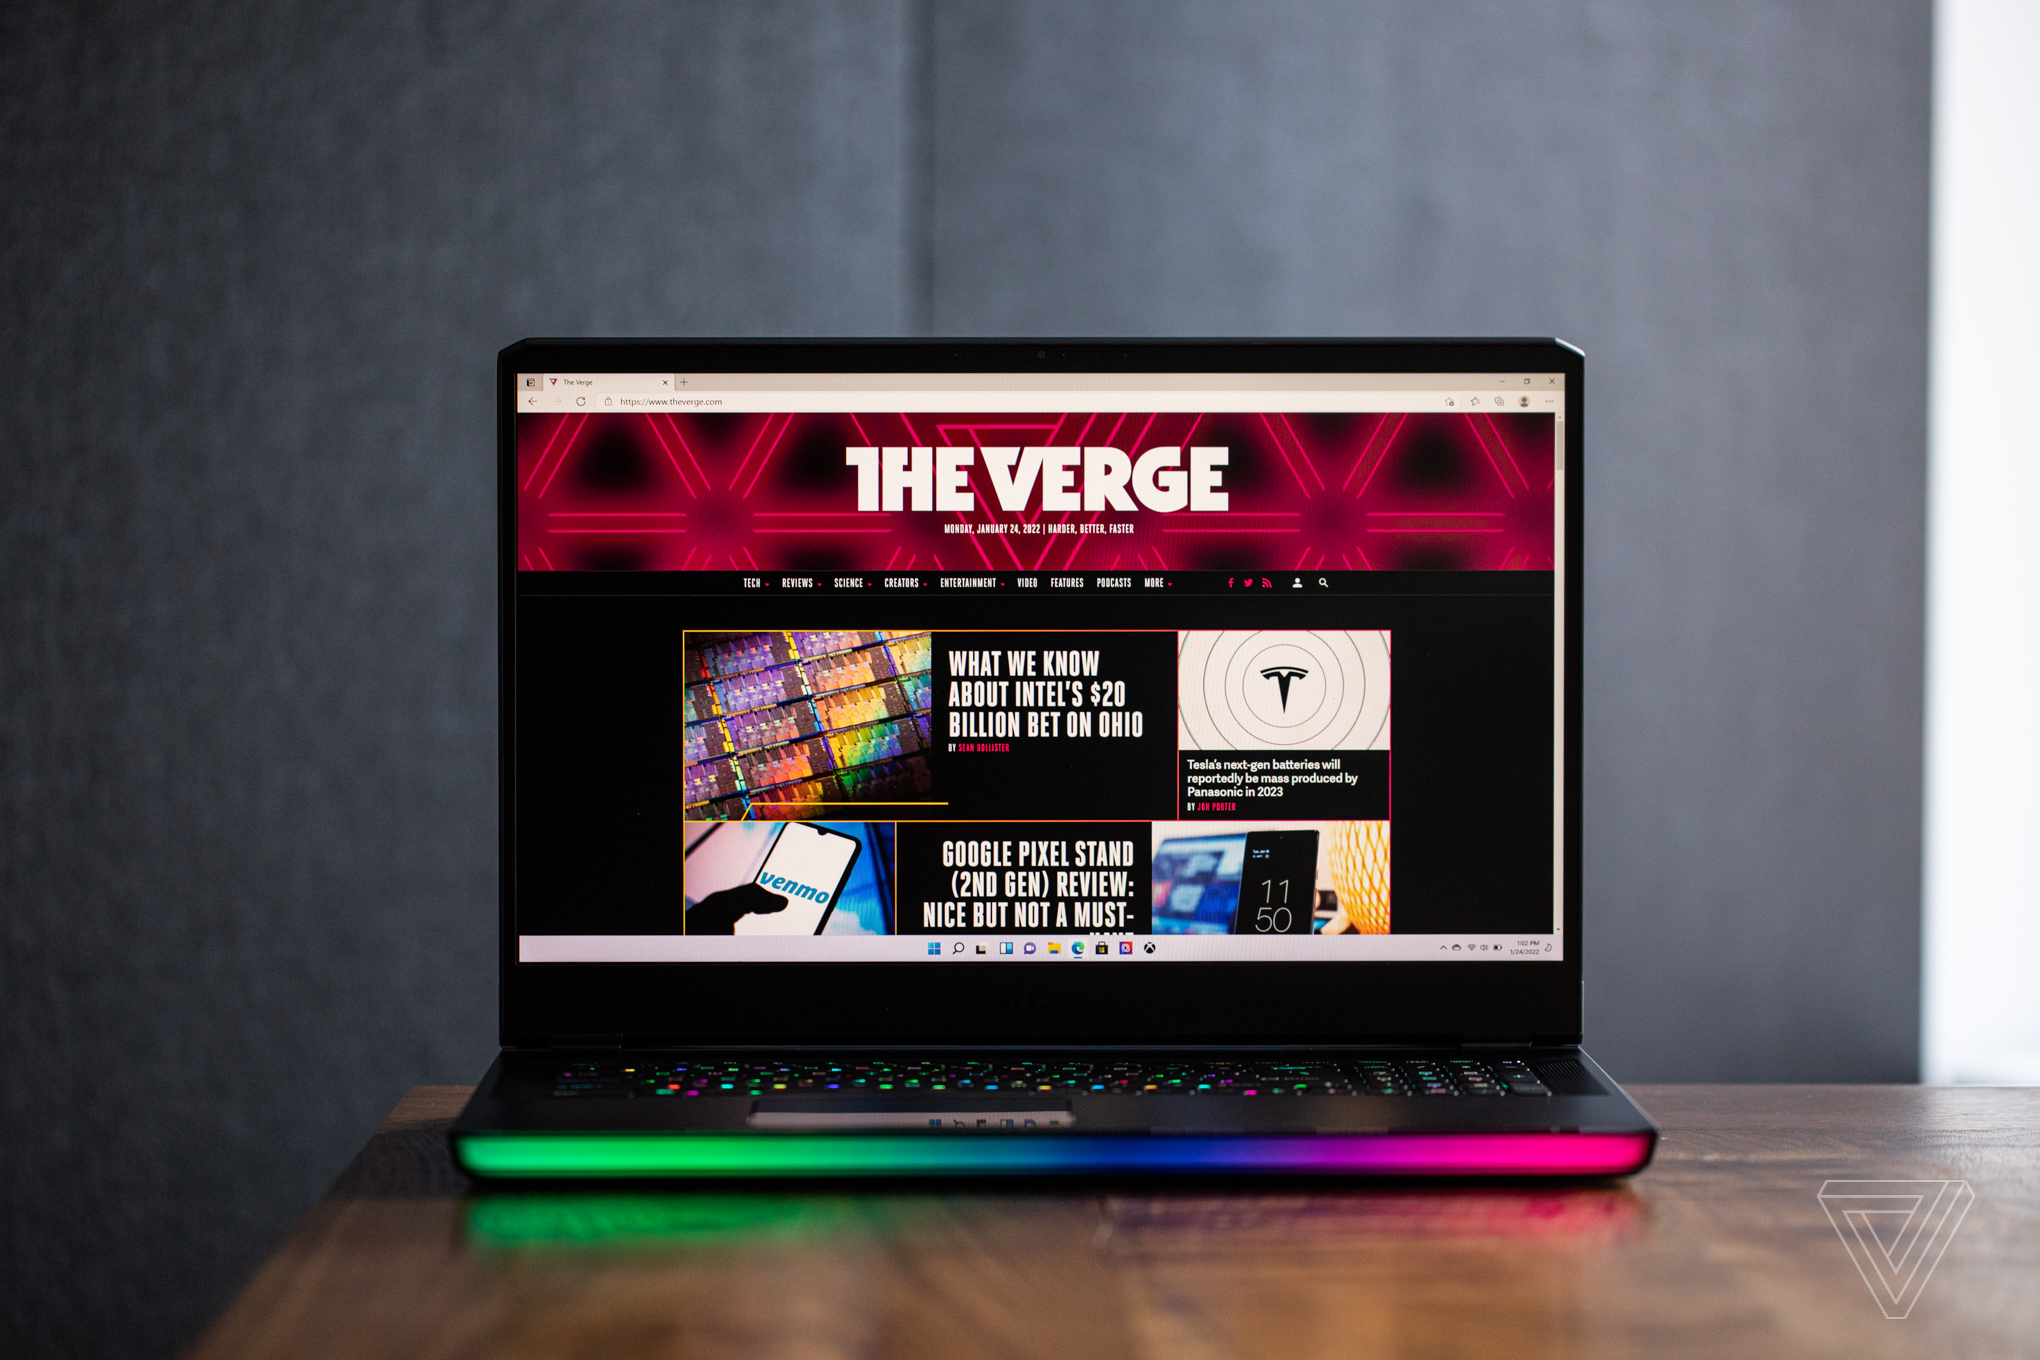 The MSI GE76 Raider seen fromn the front on a wooden table. The screen displays The Verge homepage.